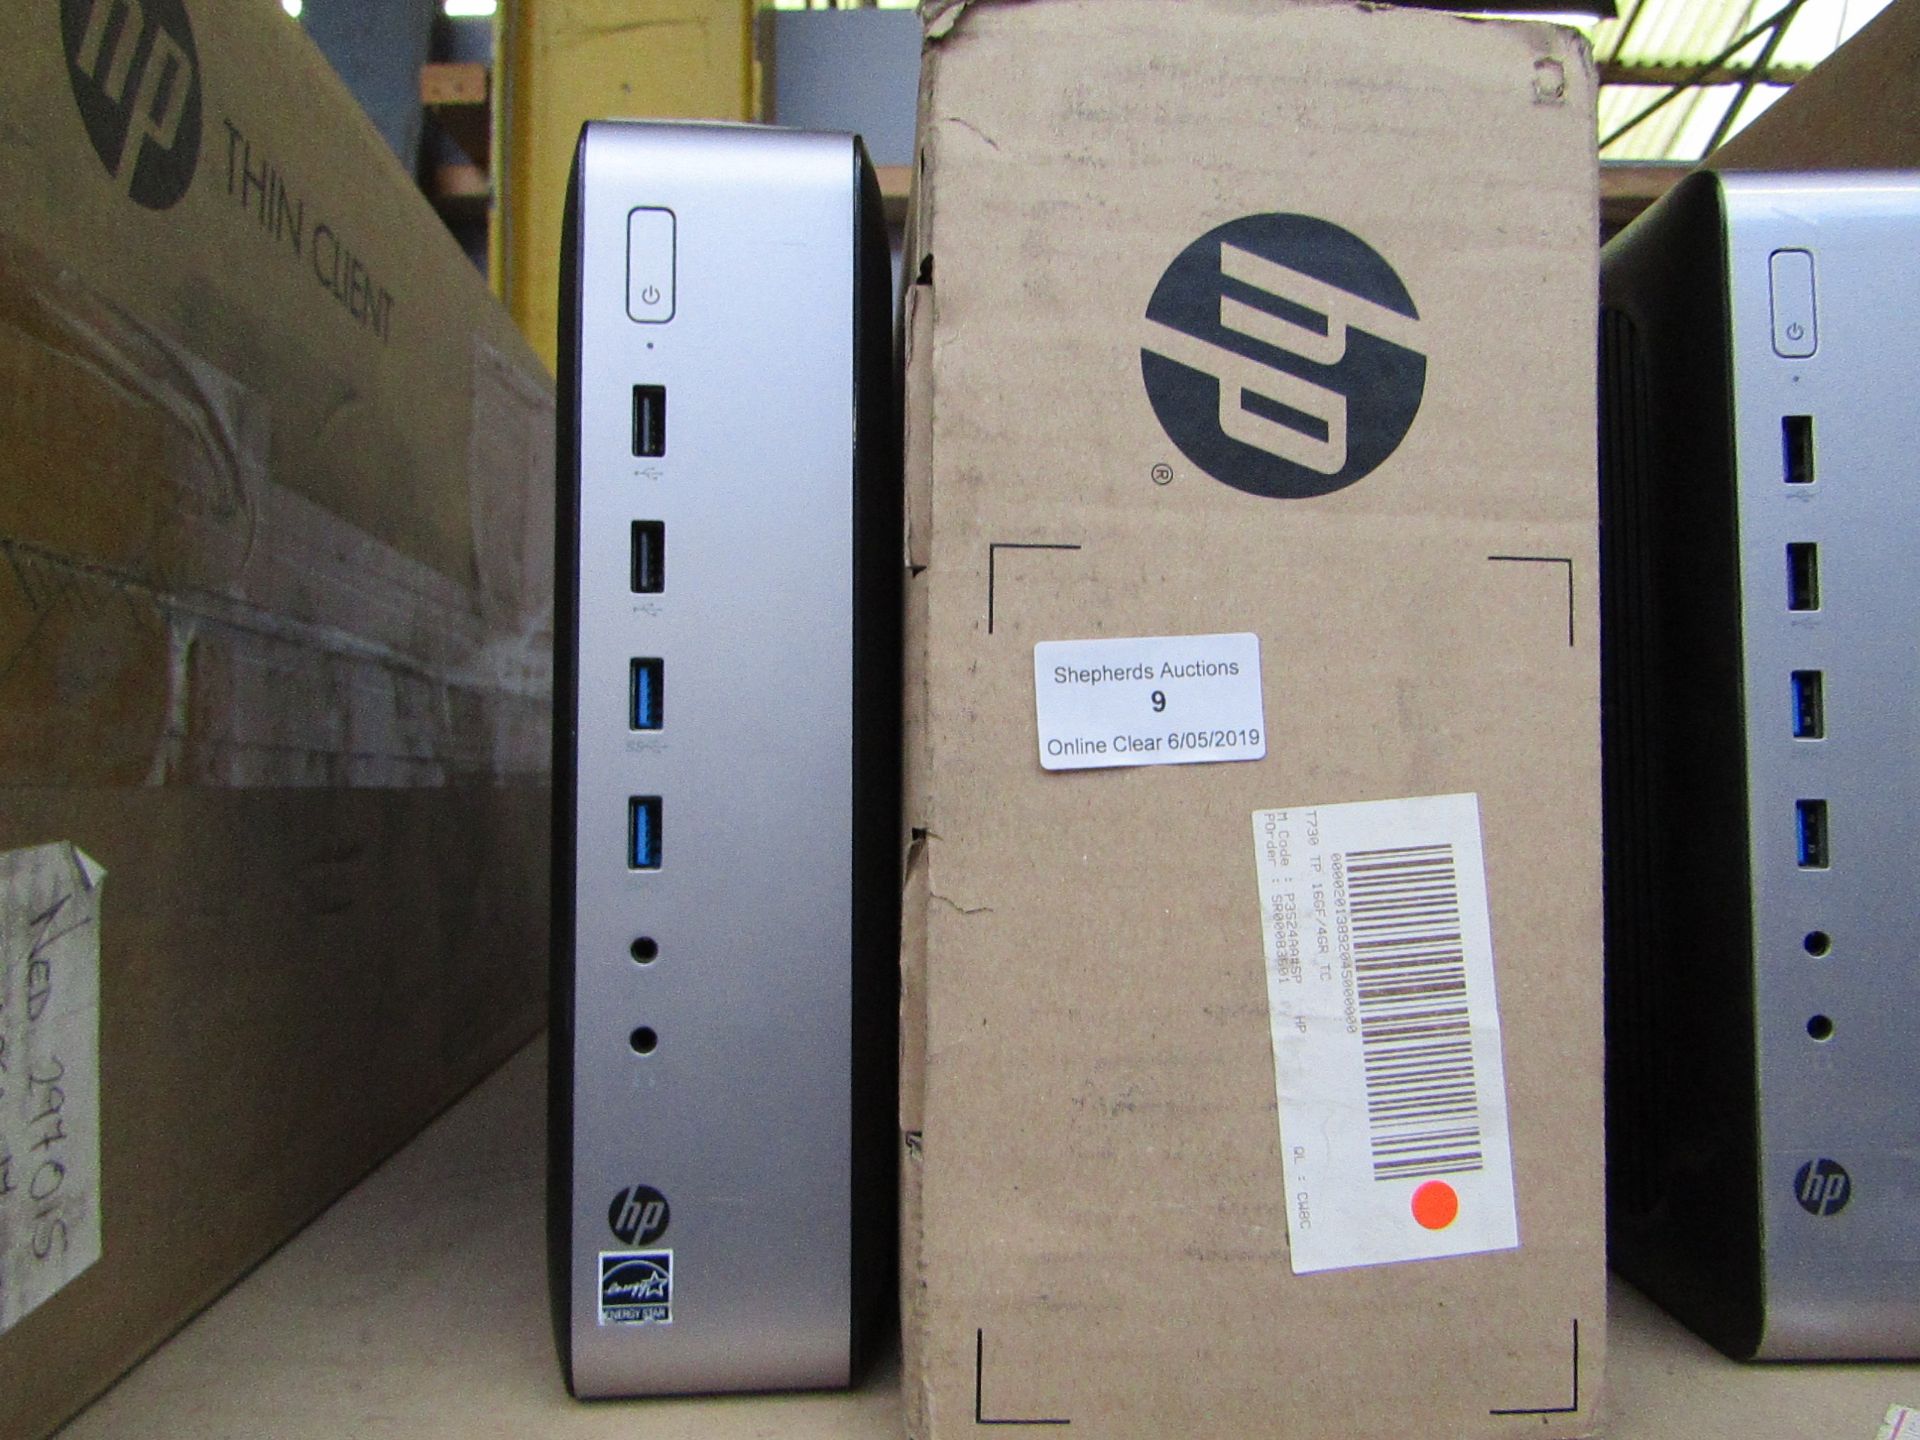 HP T730 TP 16GF/4GR ES TC, Grade B (refer to Lot 0 for condition) and boxed.Processor: 1 x AMD